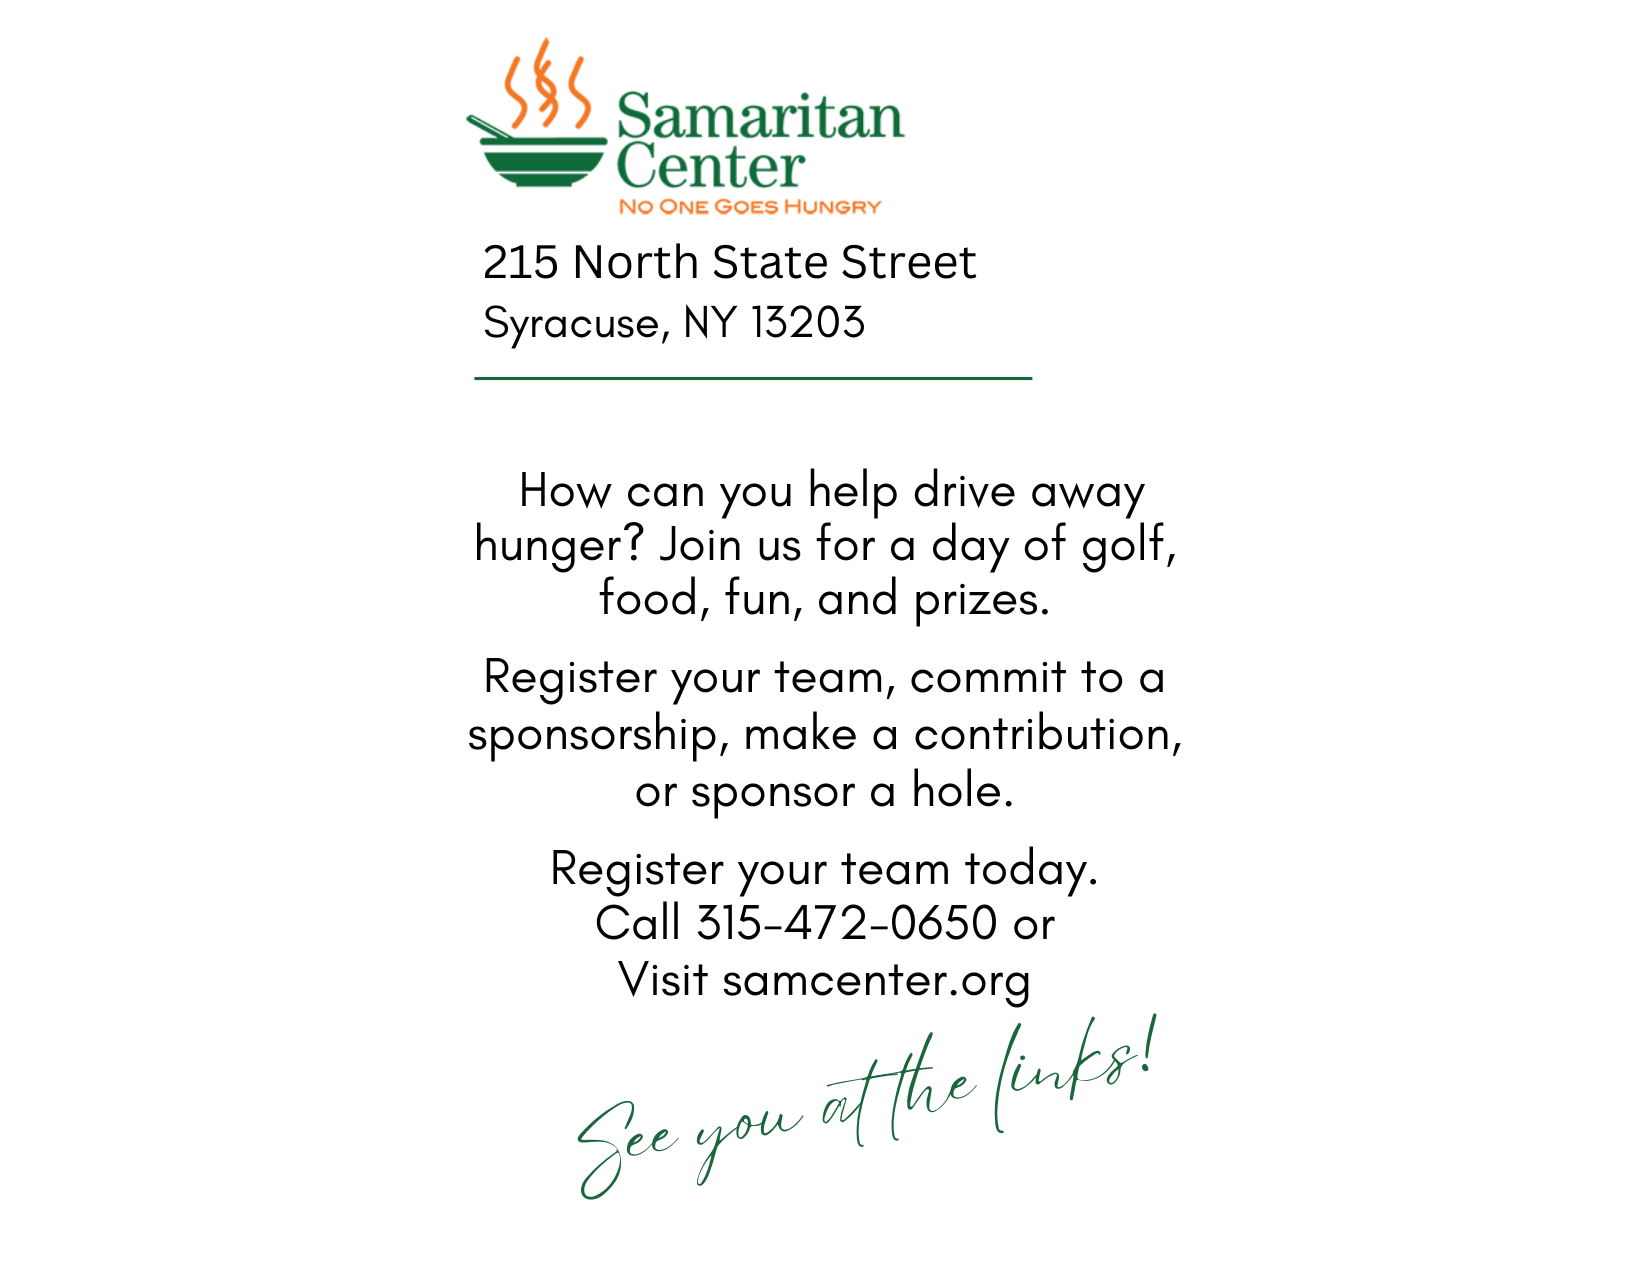 How can you help drive away hunger? Join us for a day of golf, food, fun, and prizes. Register your team, commit to a sponsorship, make a contribution, or sponsor a hole. Register your team today. Call 315-472-0650 or Visit samcenter.org